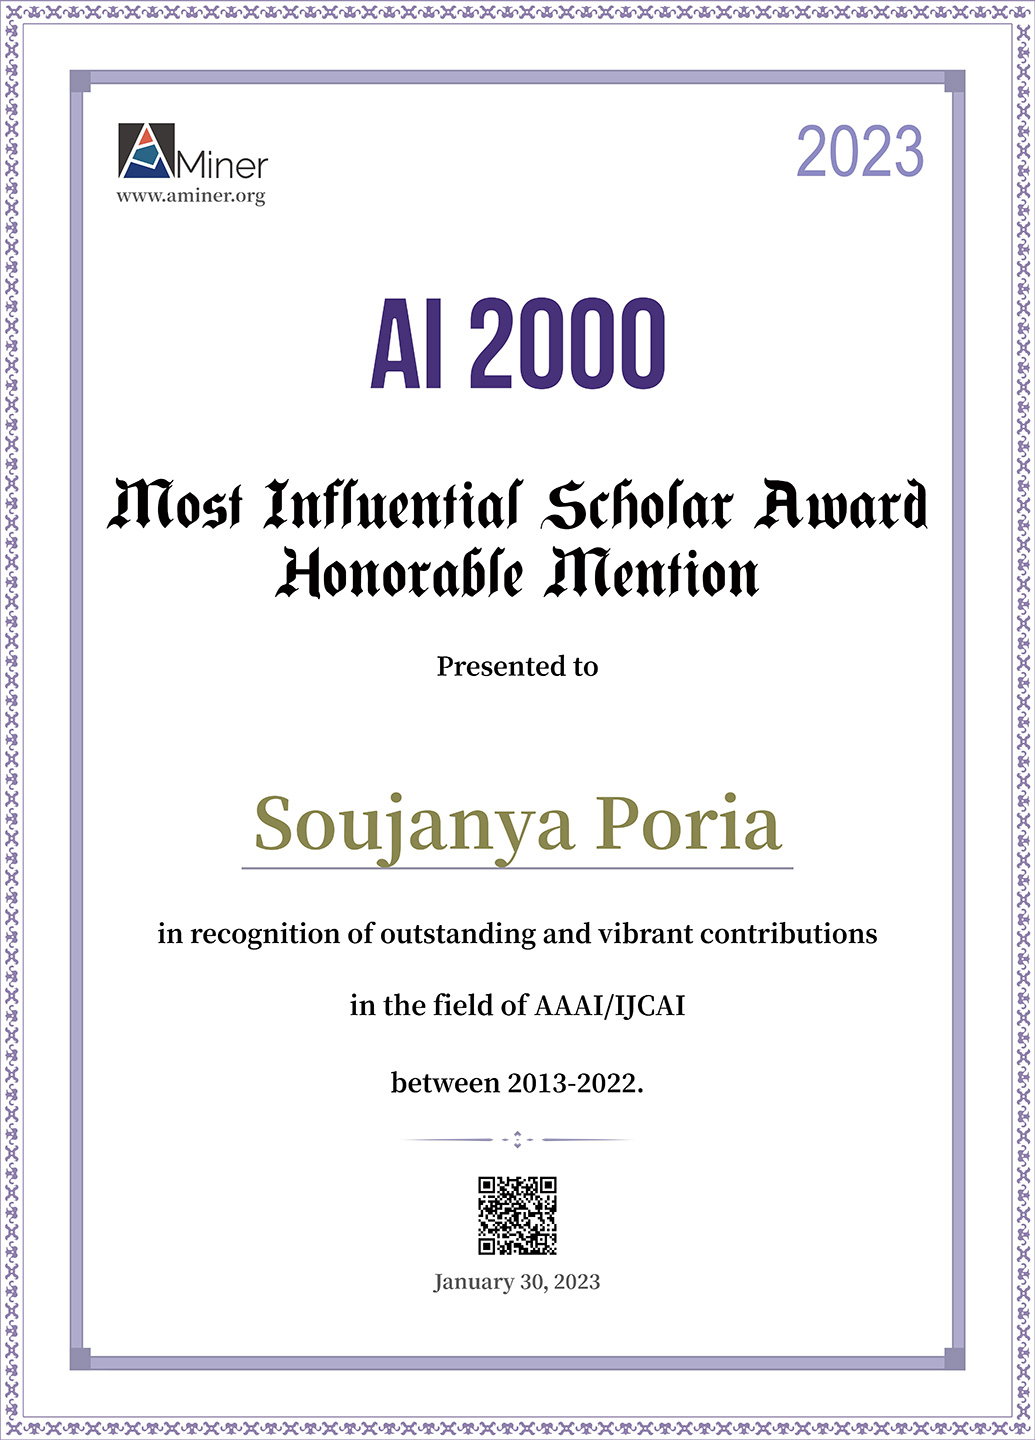 Congratulations to Assistant Professor Soujanya for the recognition as the 2023 AI 2000 Most Influential Scholar Honorable Mention in AAAI/IJCAI